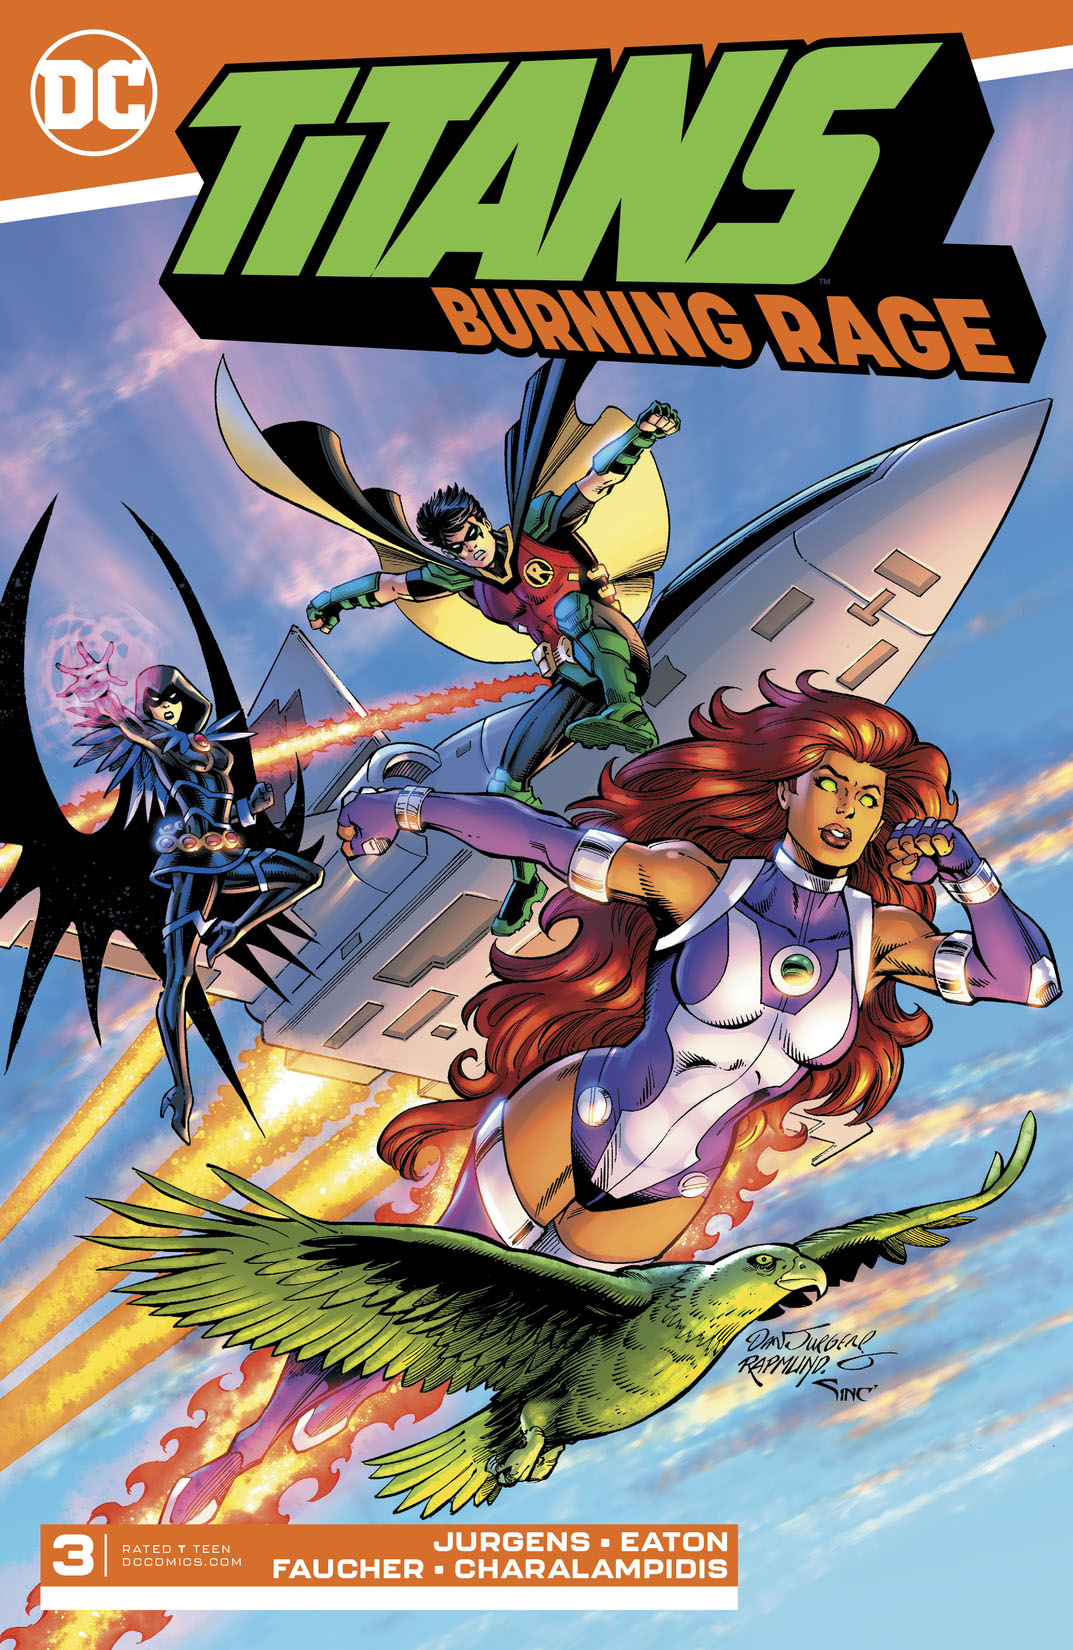 Titans: Burning Rage #3 preview images